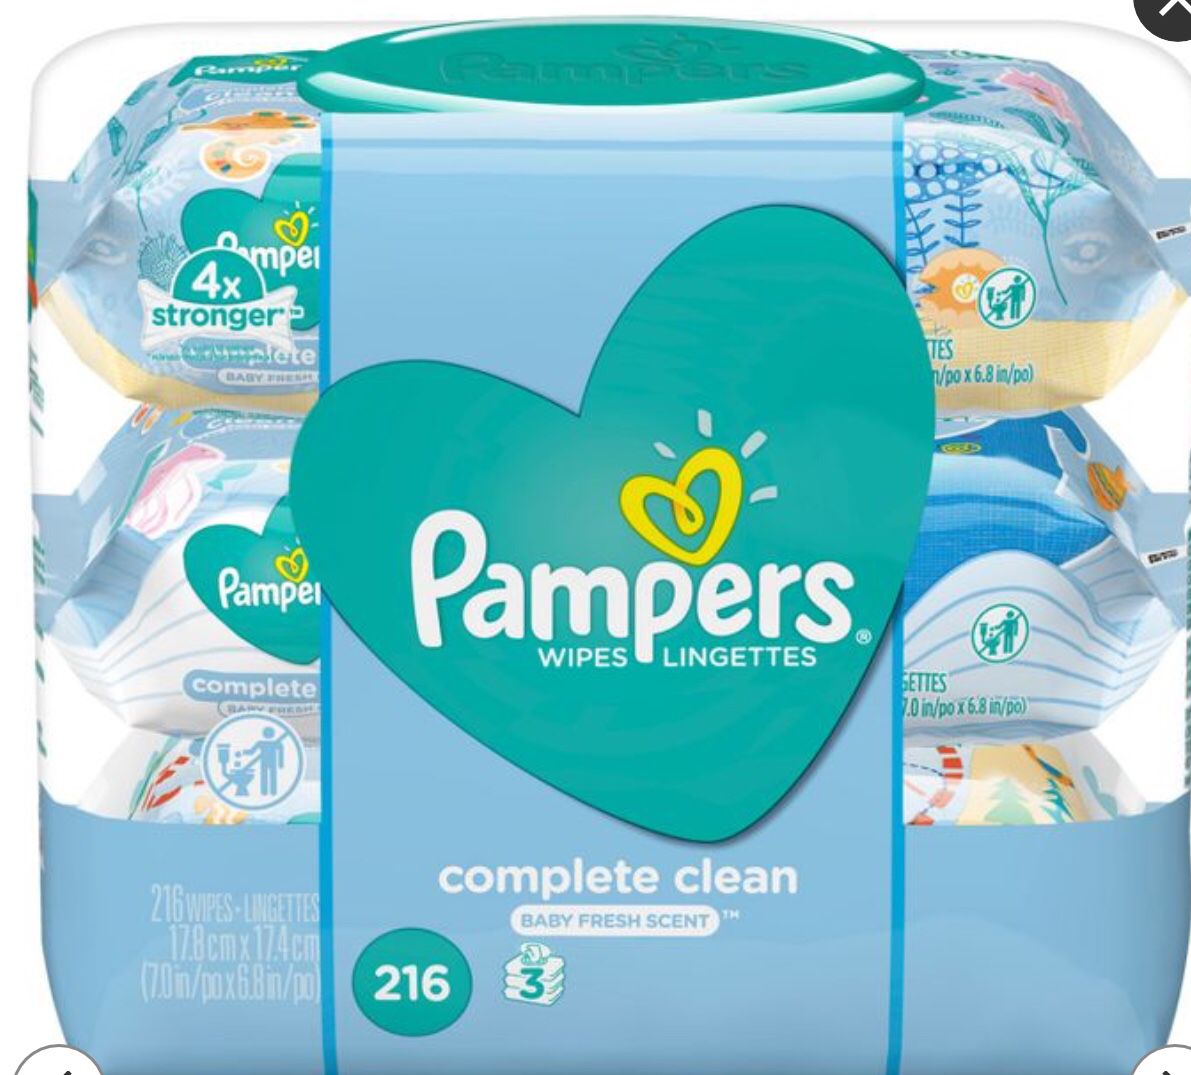 Pampers wipes, 216count, new